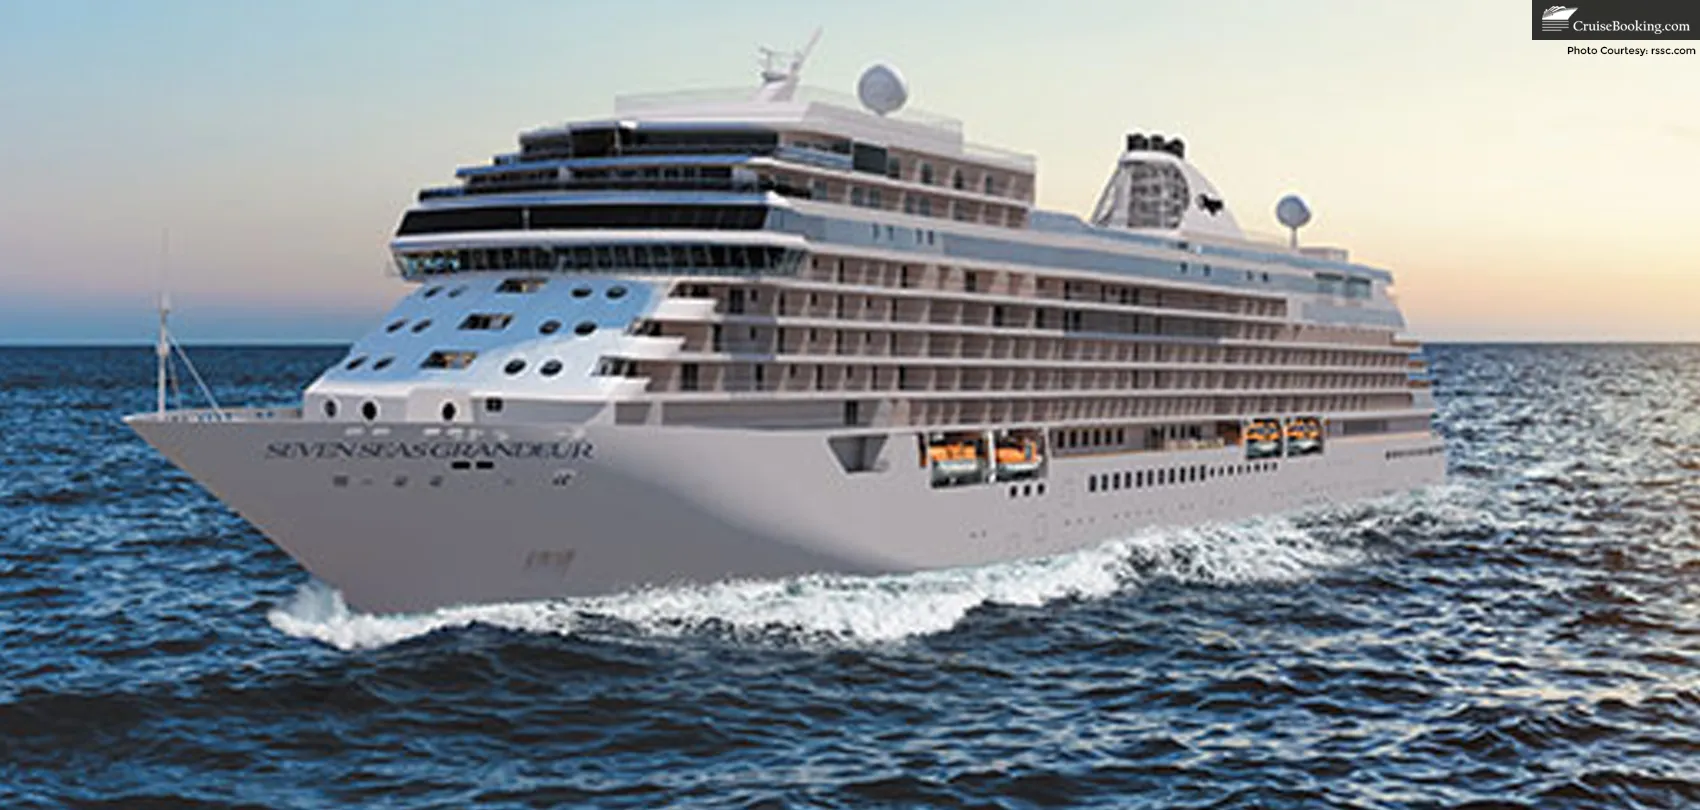 Five new grand voyages are announced by Regent for 2025-2026